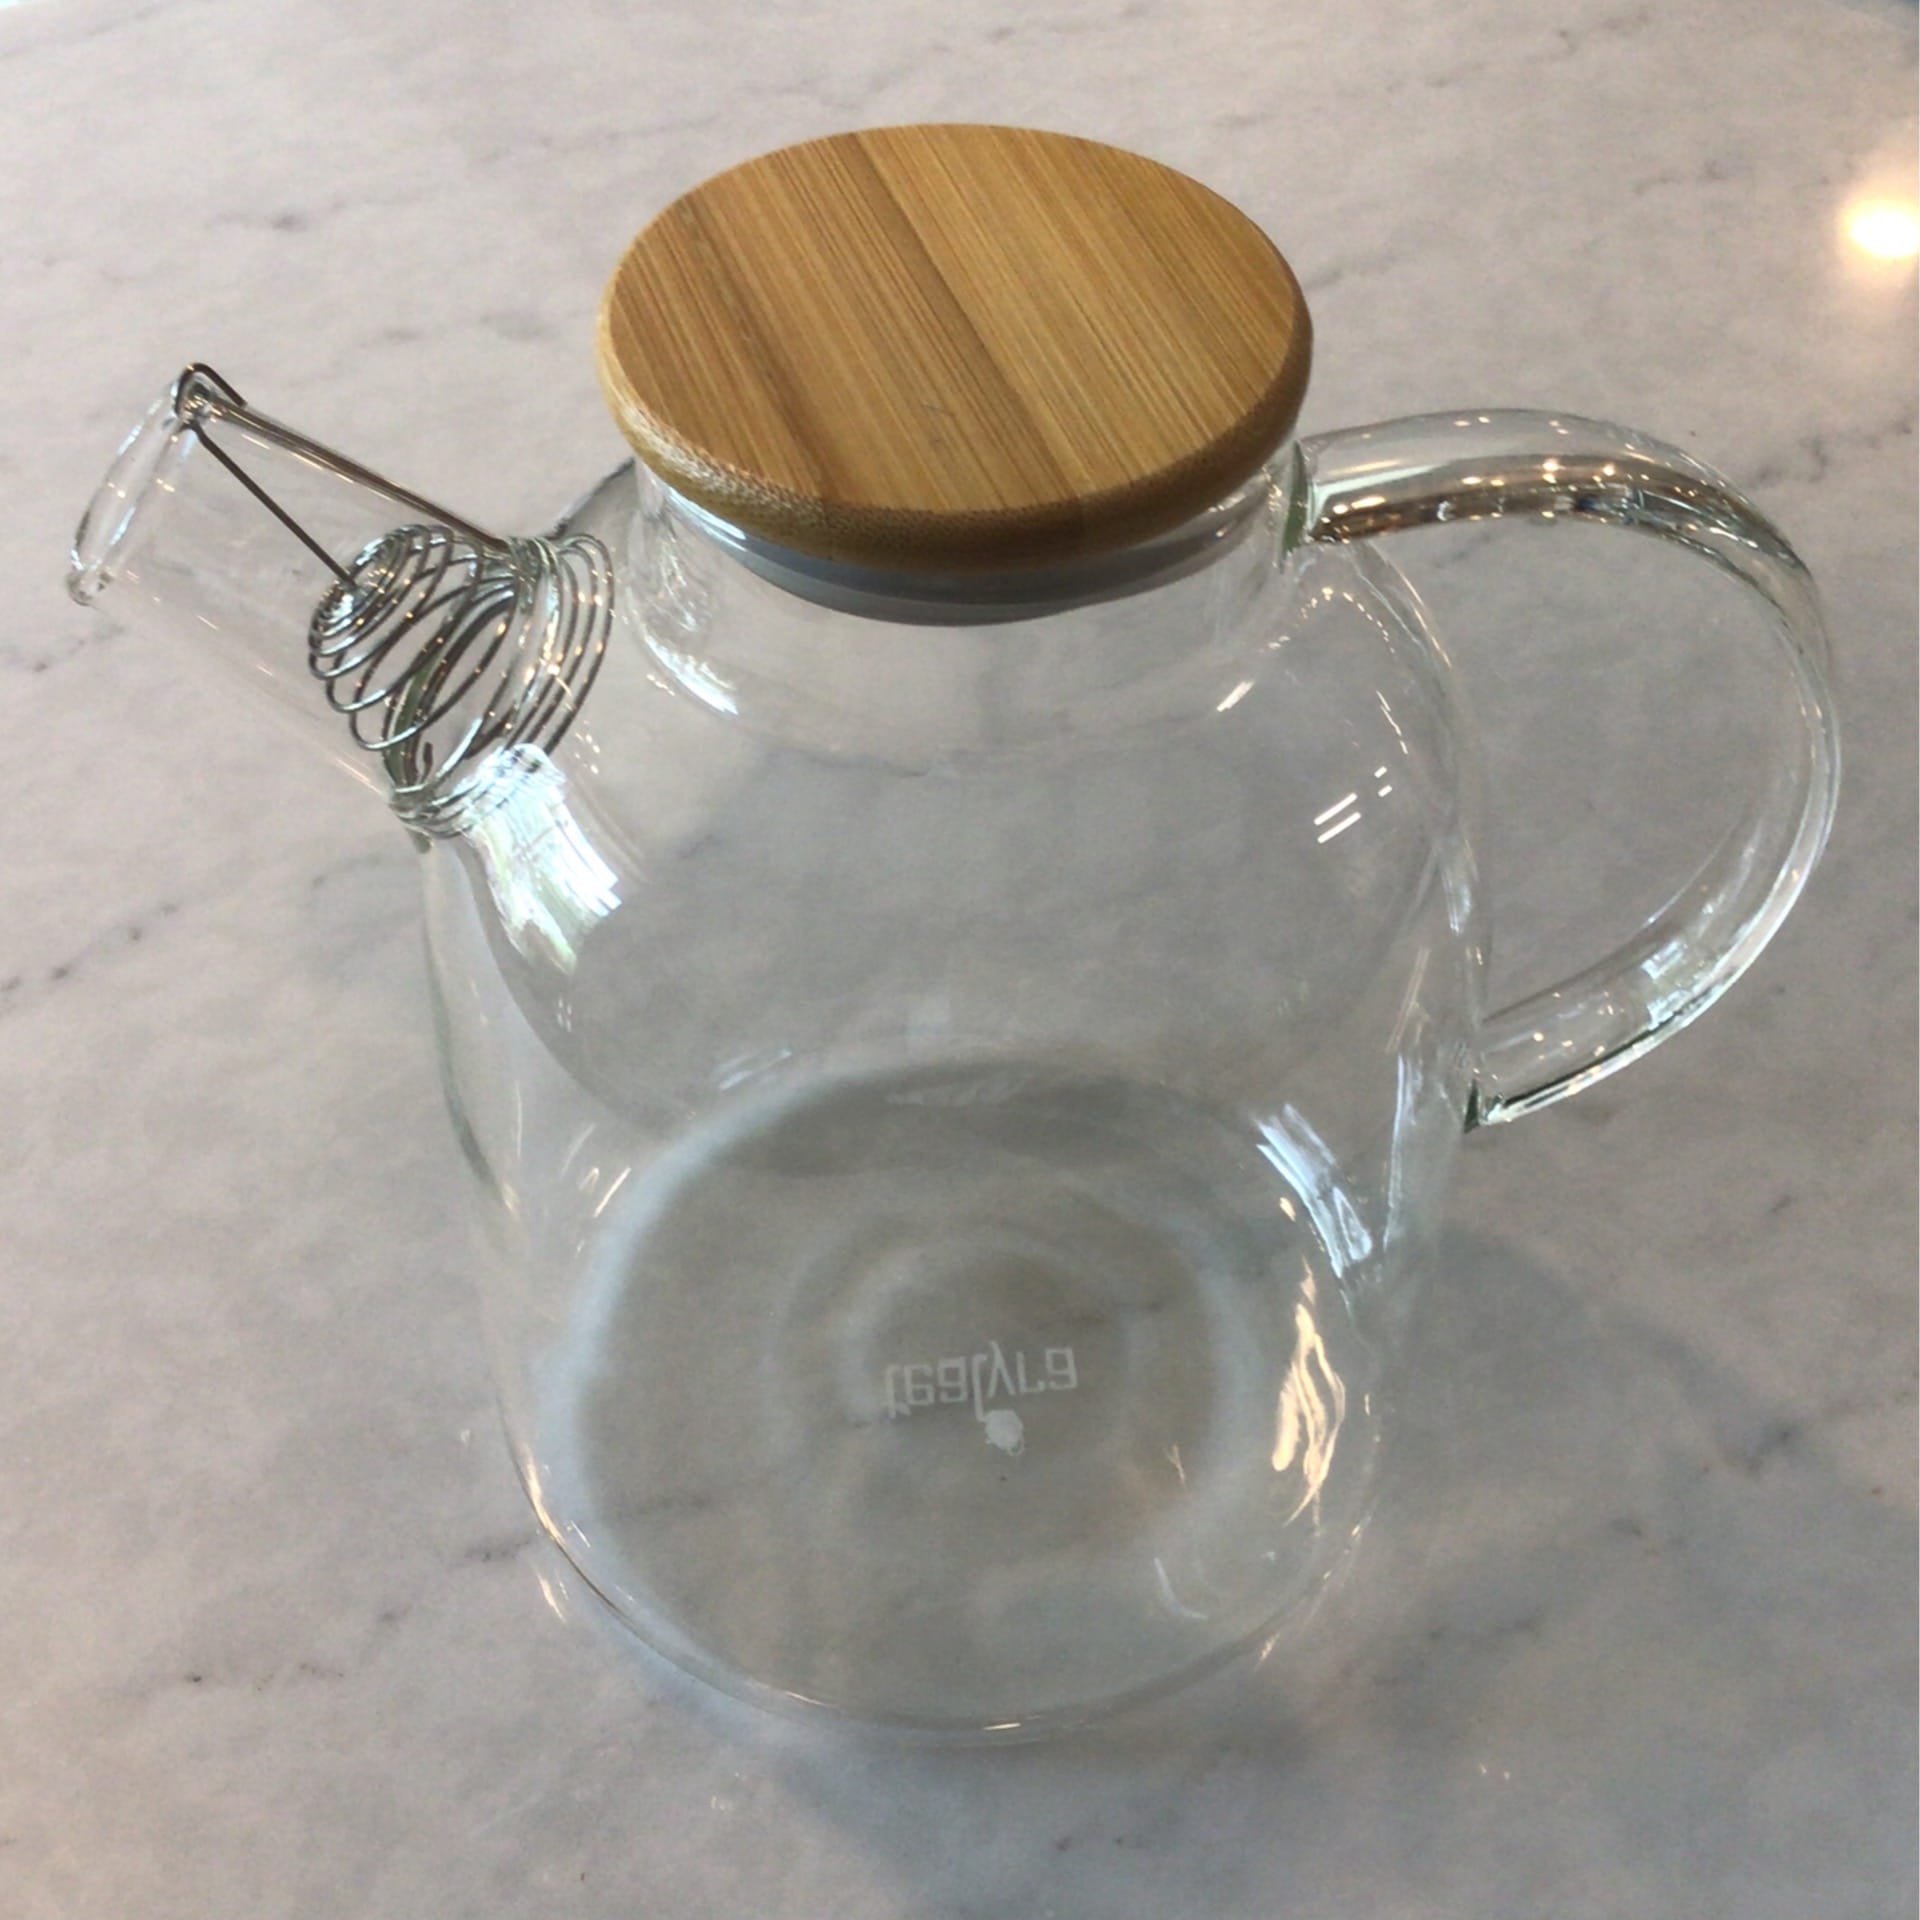 https://ex9gmccx2pn.exactdn.com/wp-content/uploads/2021/08/glass-teapot-and-kettle-with-wooden-top-60-oz.jpeg?strip=all&lossy=1&ssl=1